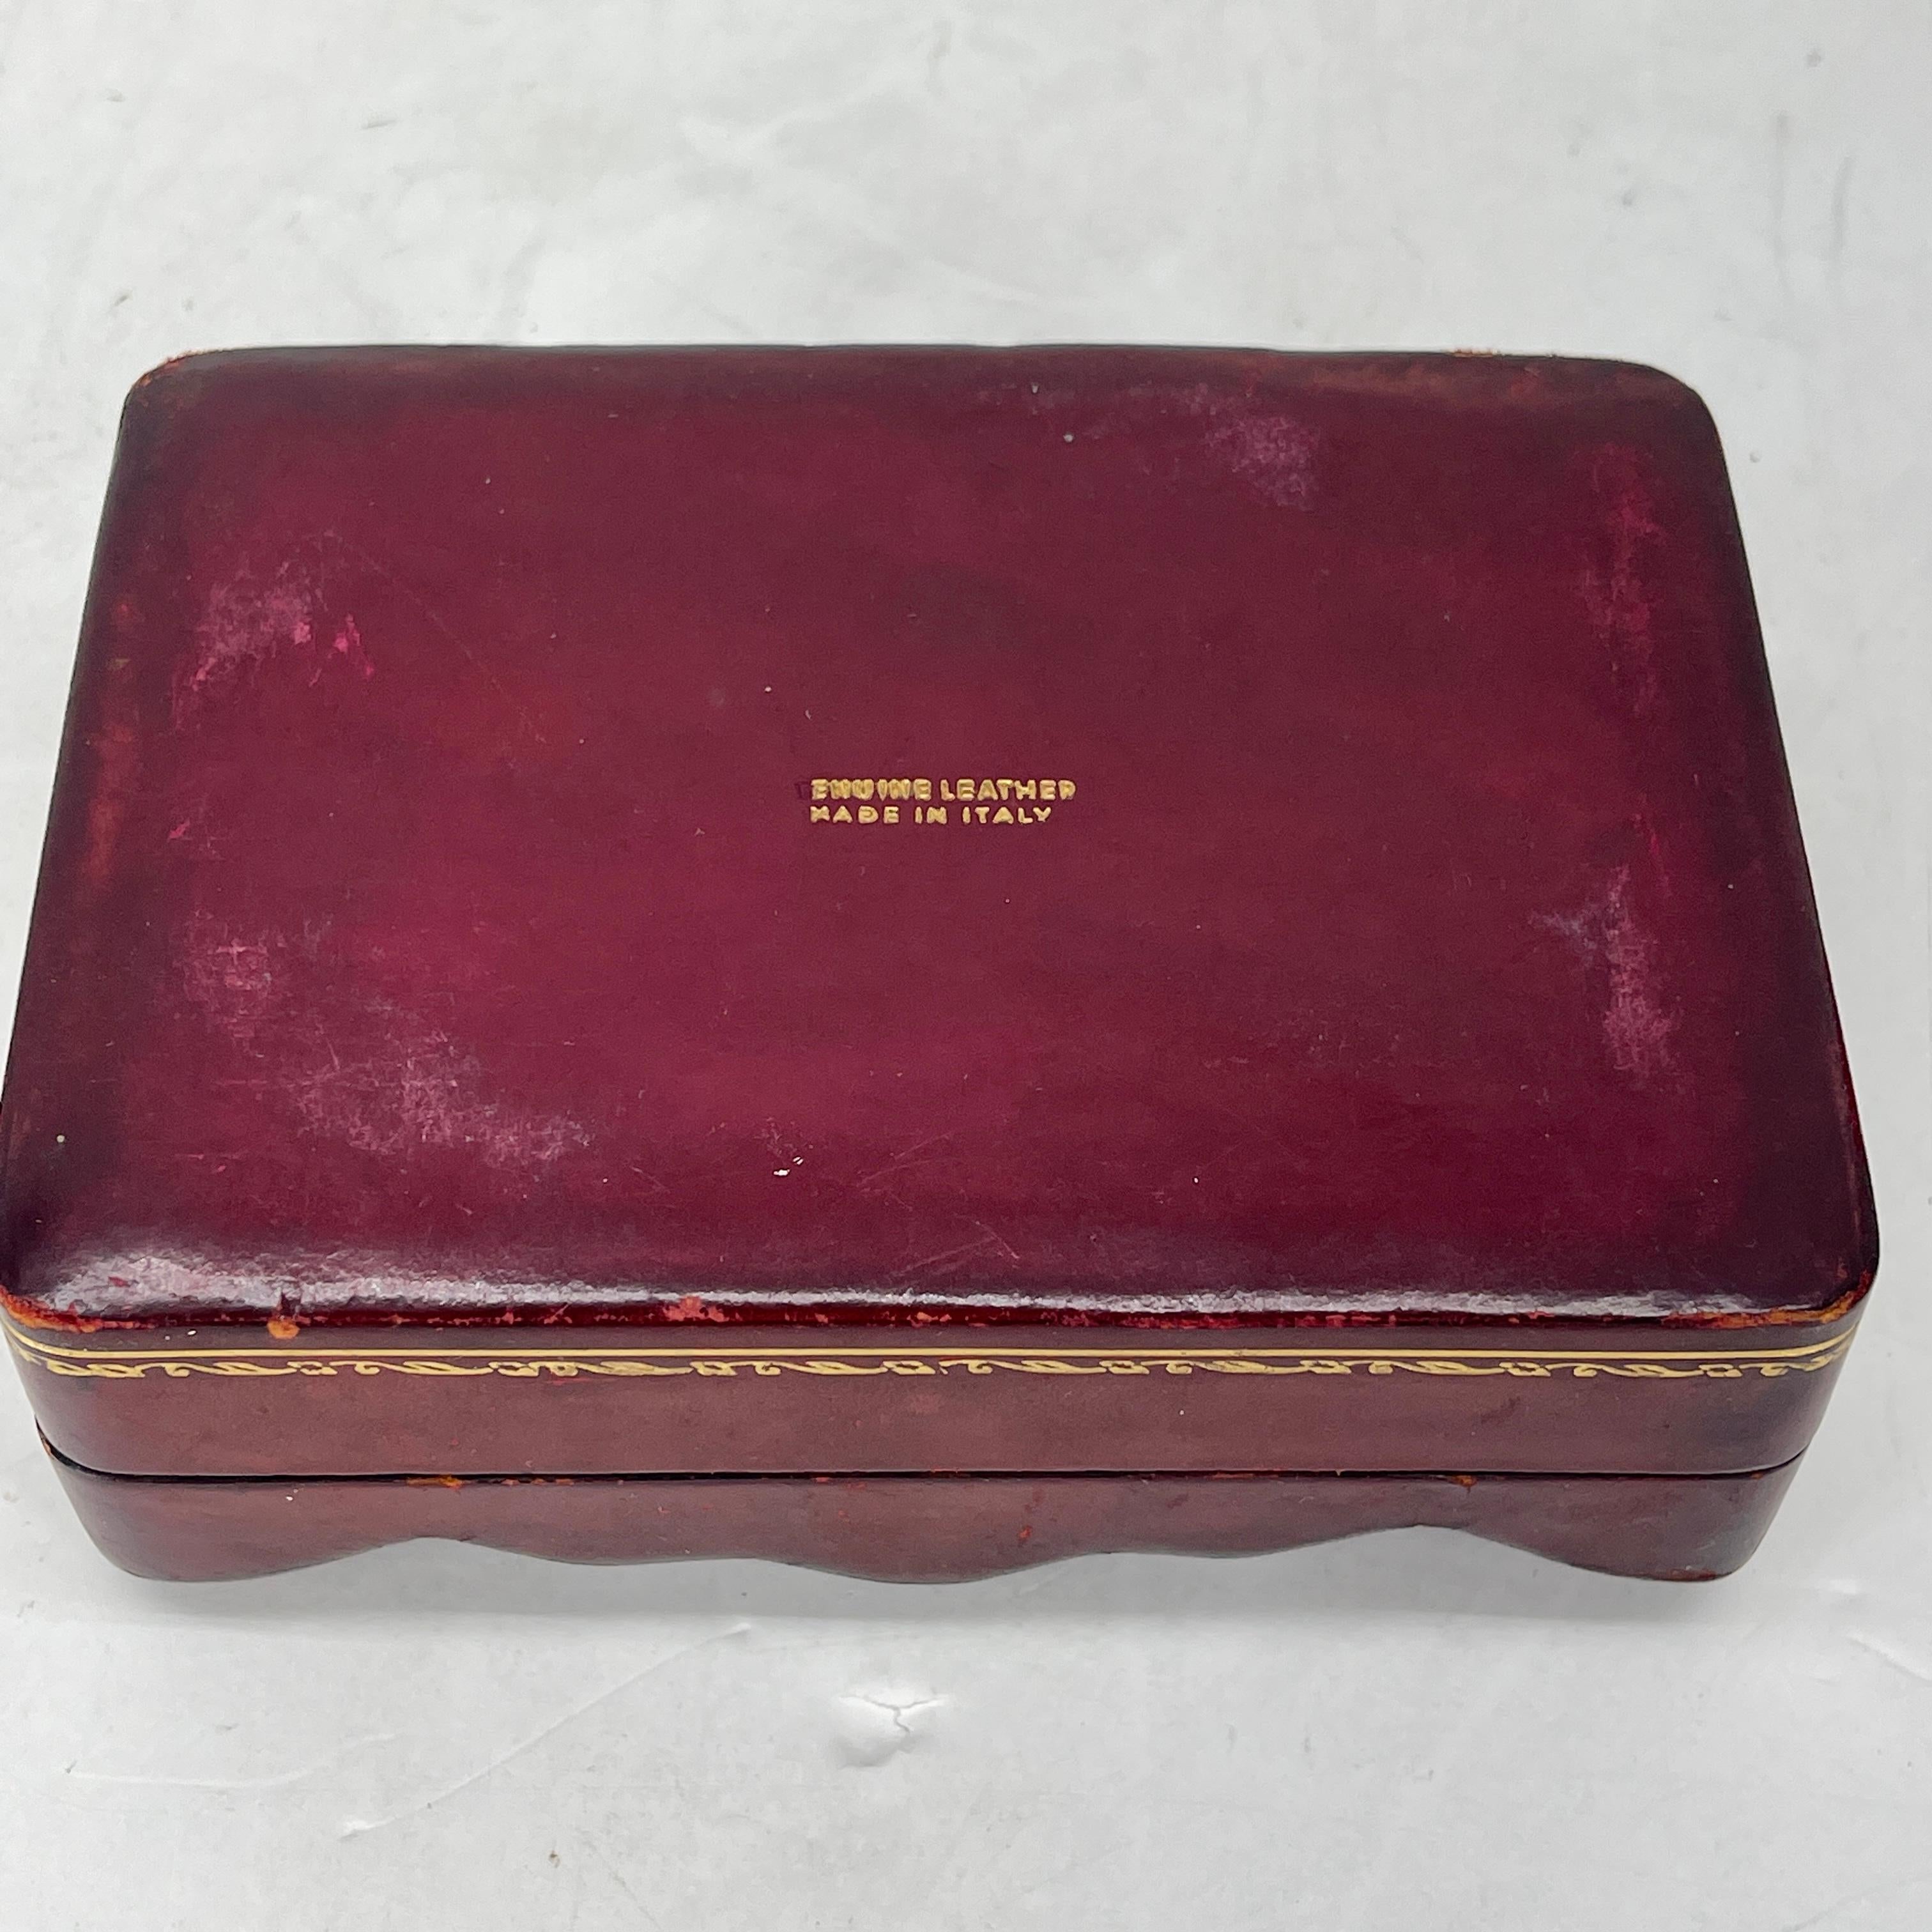 Vintage Italian Jewelry Box in Burgundy Leather, Circa 1950's For Sale 7